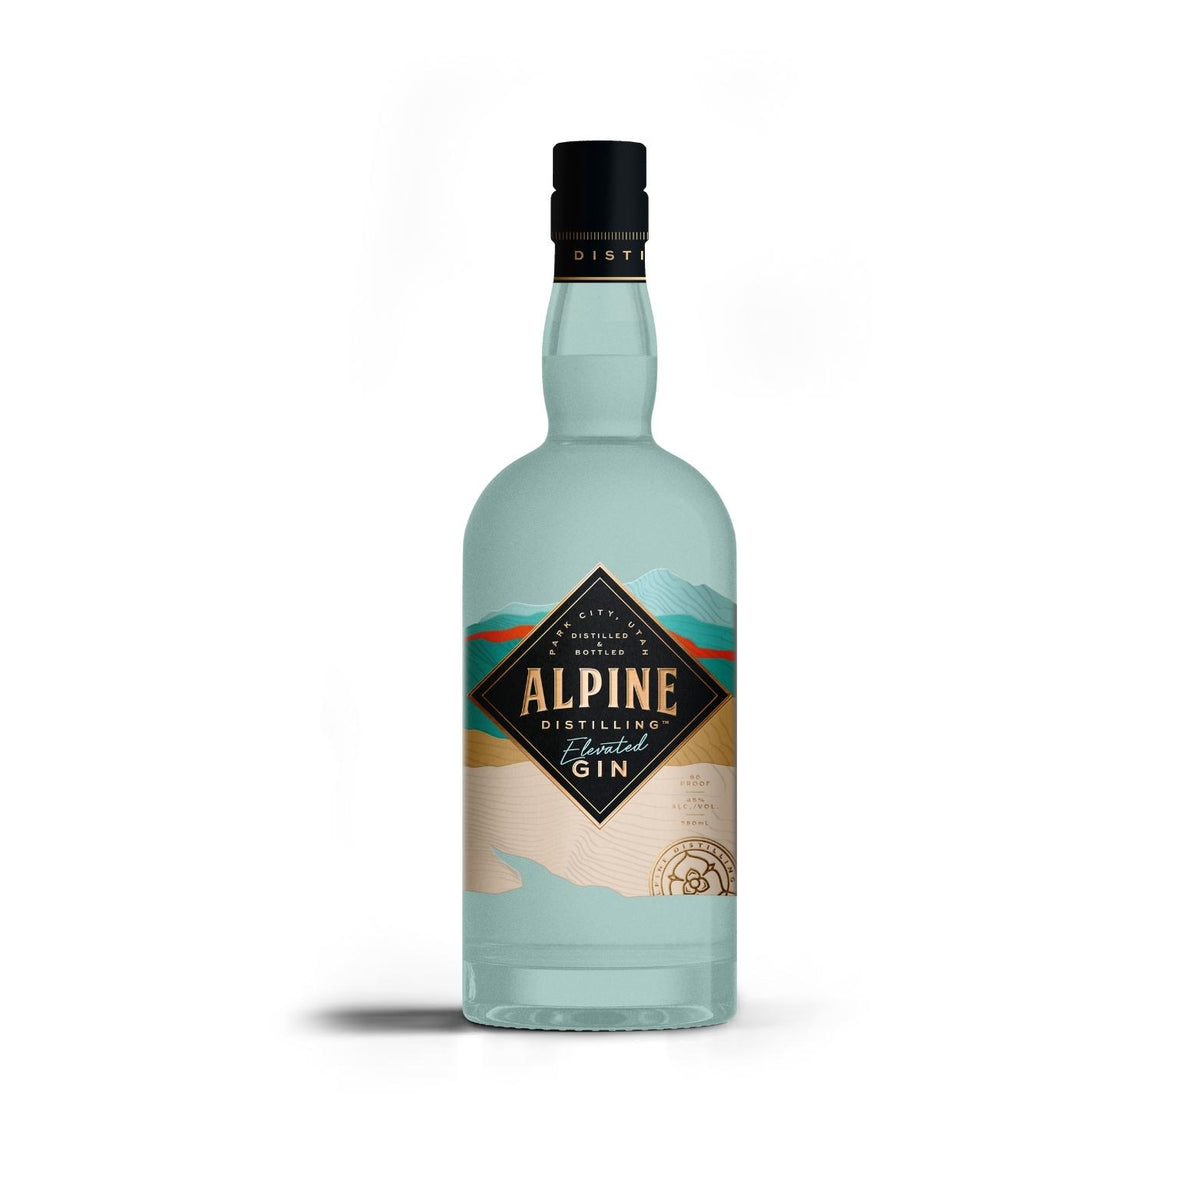 TIPXY - Elevated Alpine Distilling Gin —